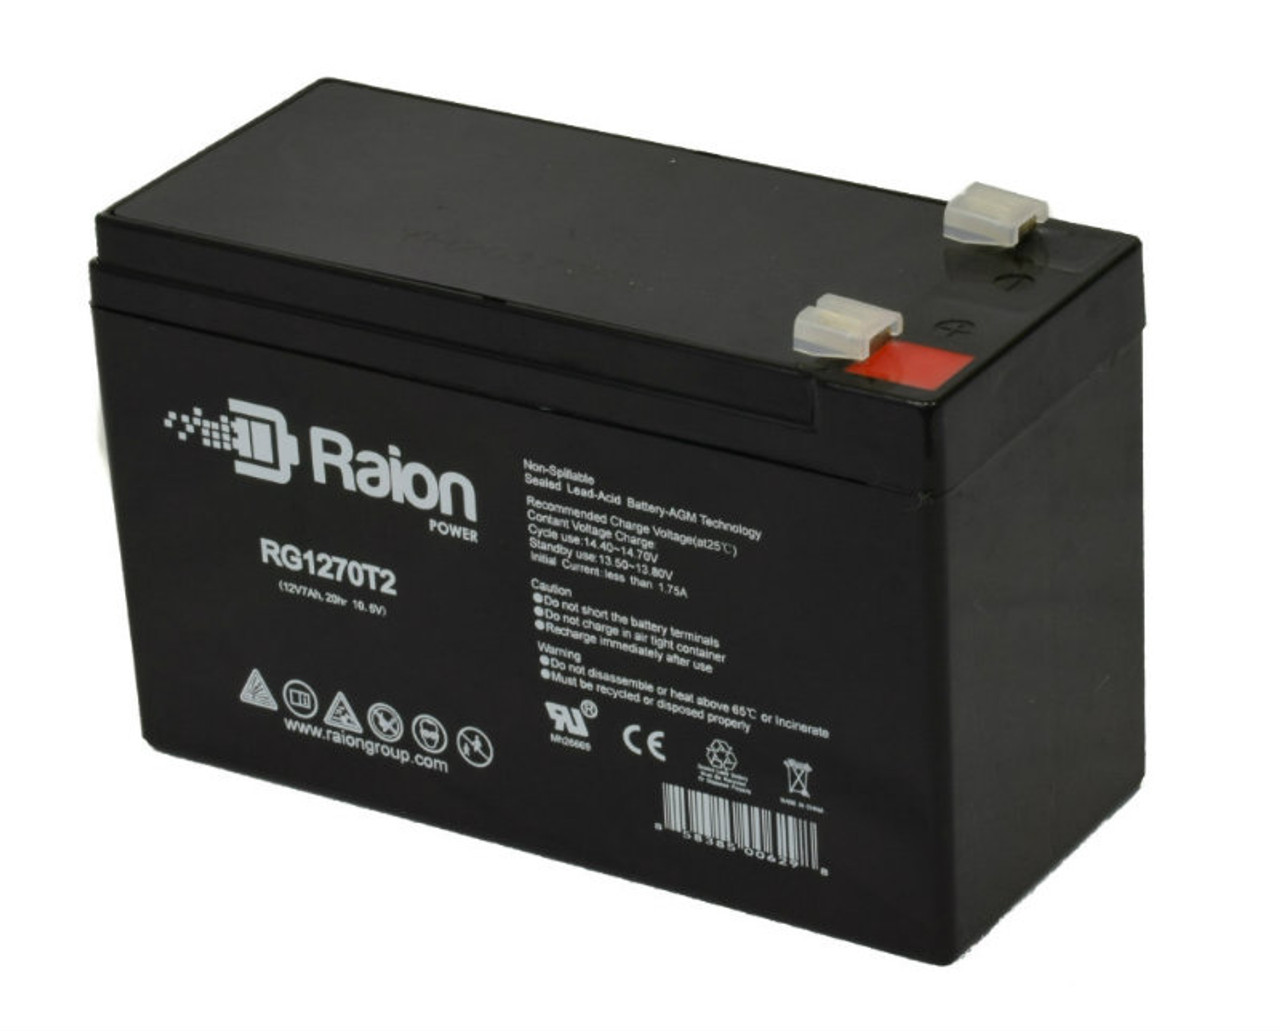 Raion Power Replacement 12V 7Ah Battery for GS Portalac PXL12072 - 1 Pack